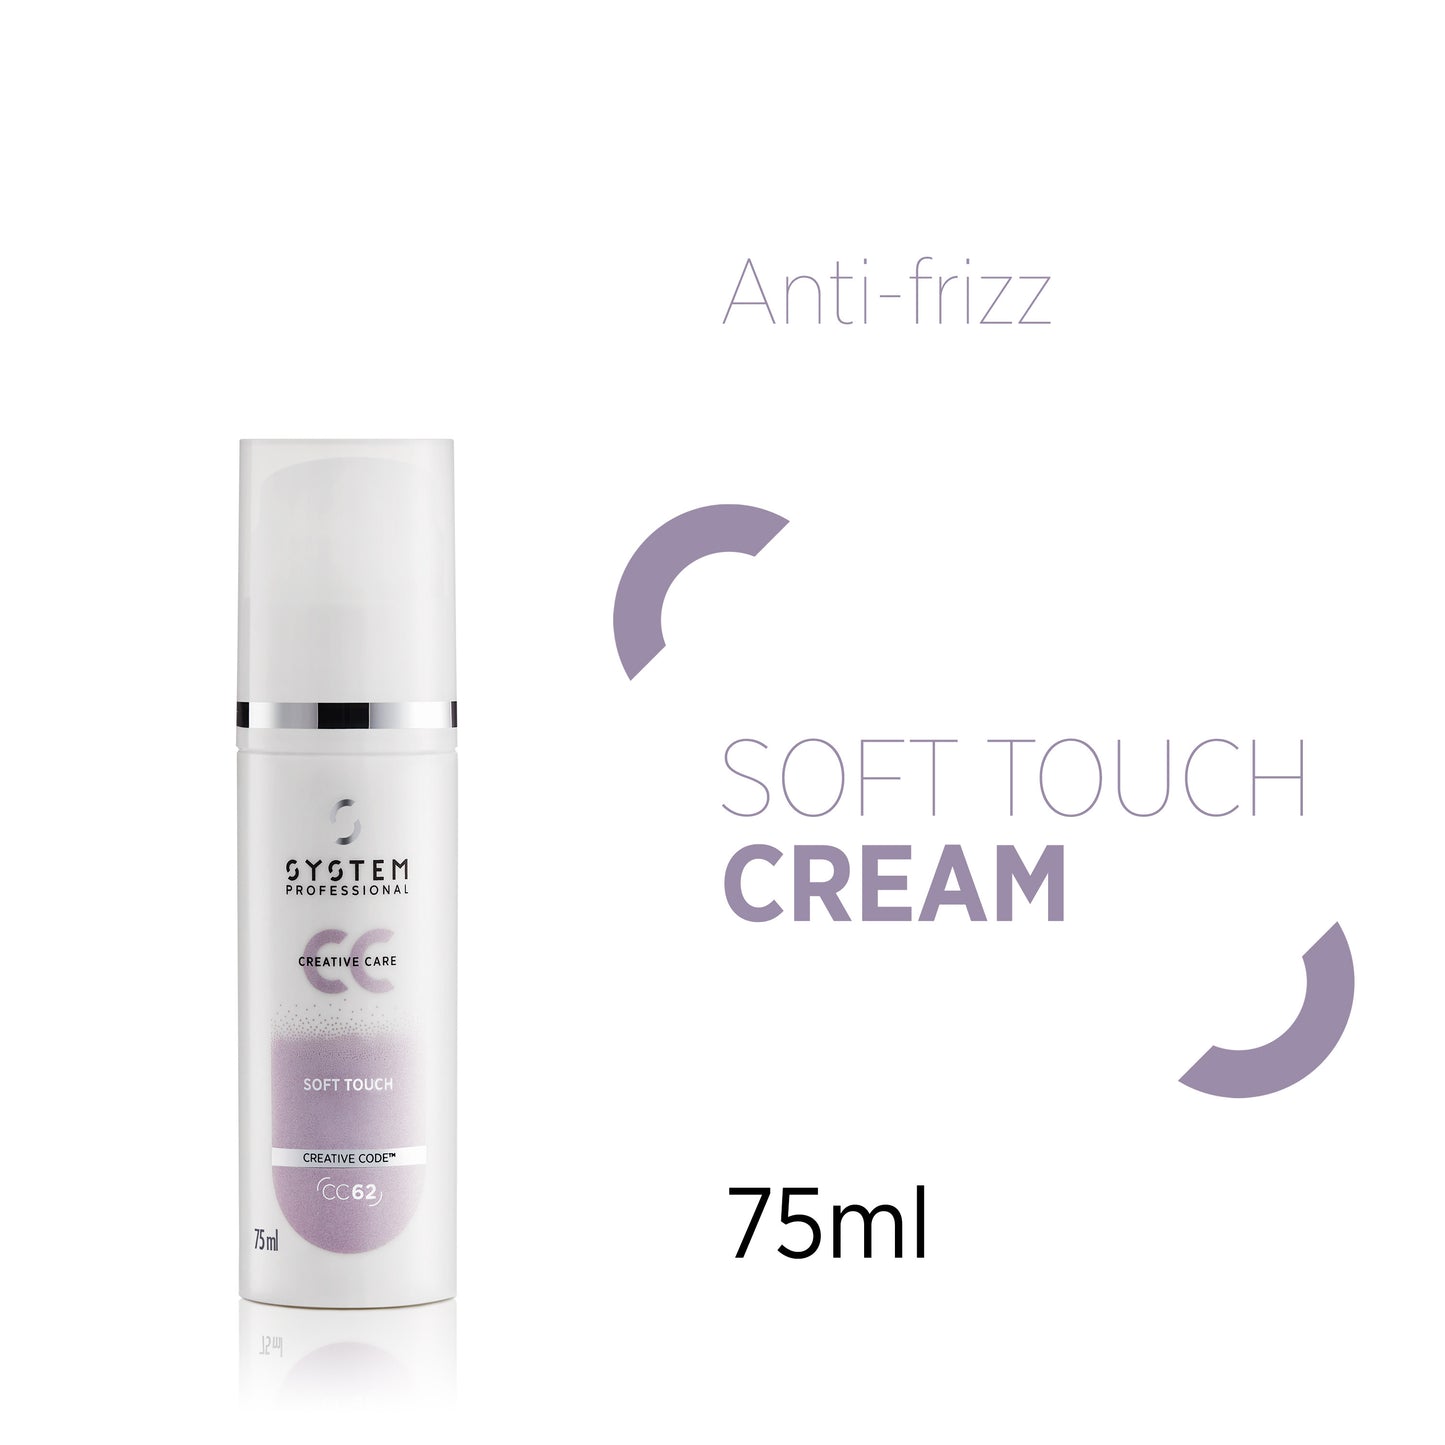 System Professional Creative Care Soft Touch 75ml




